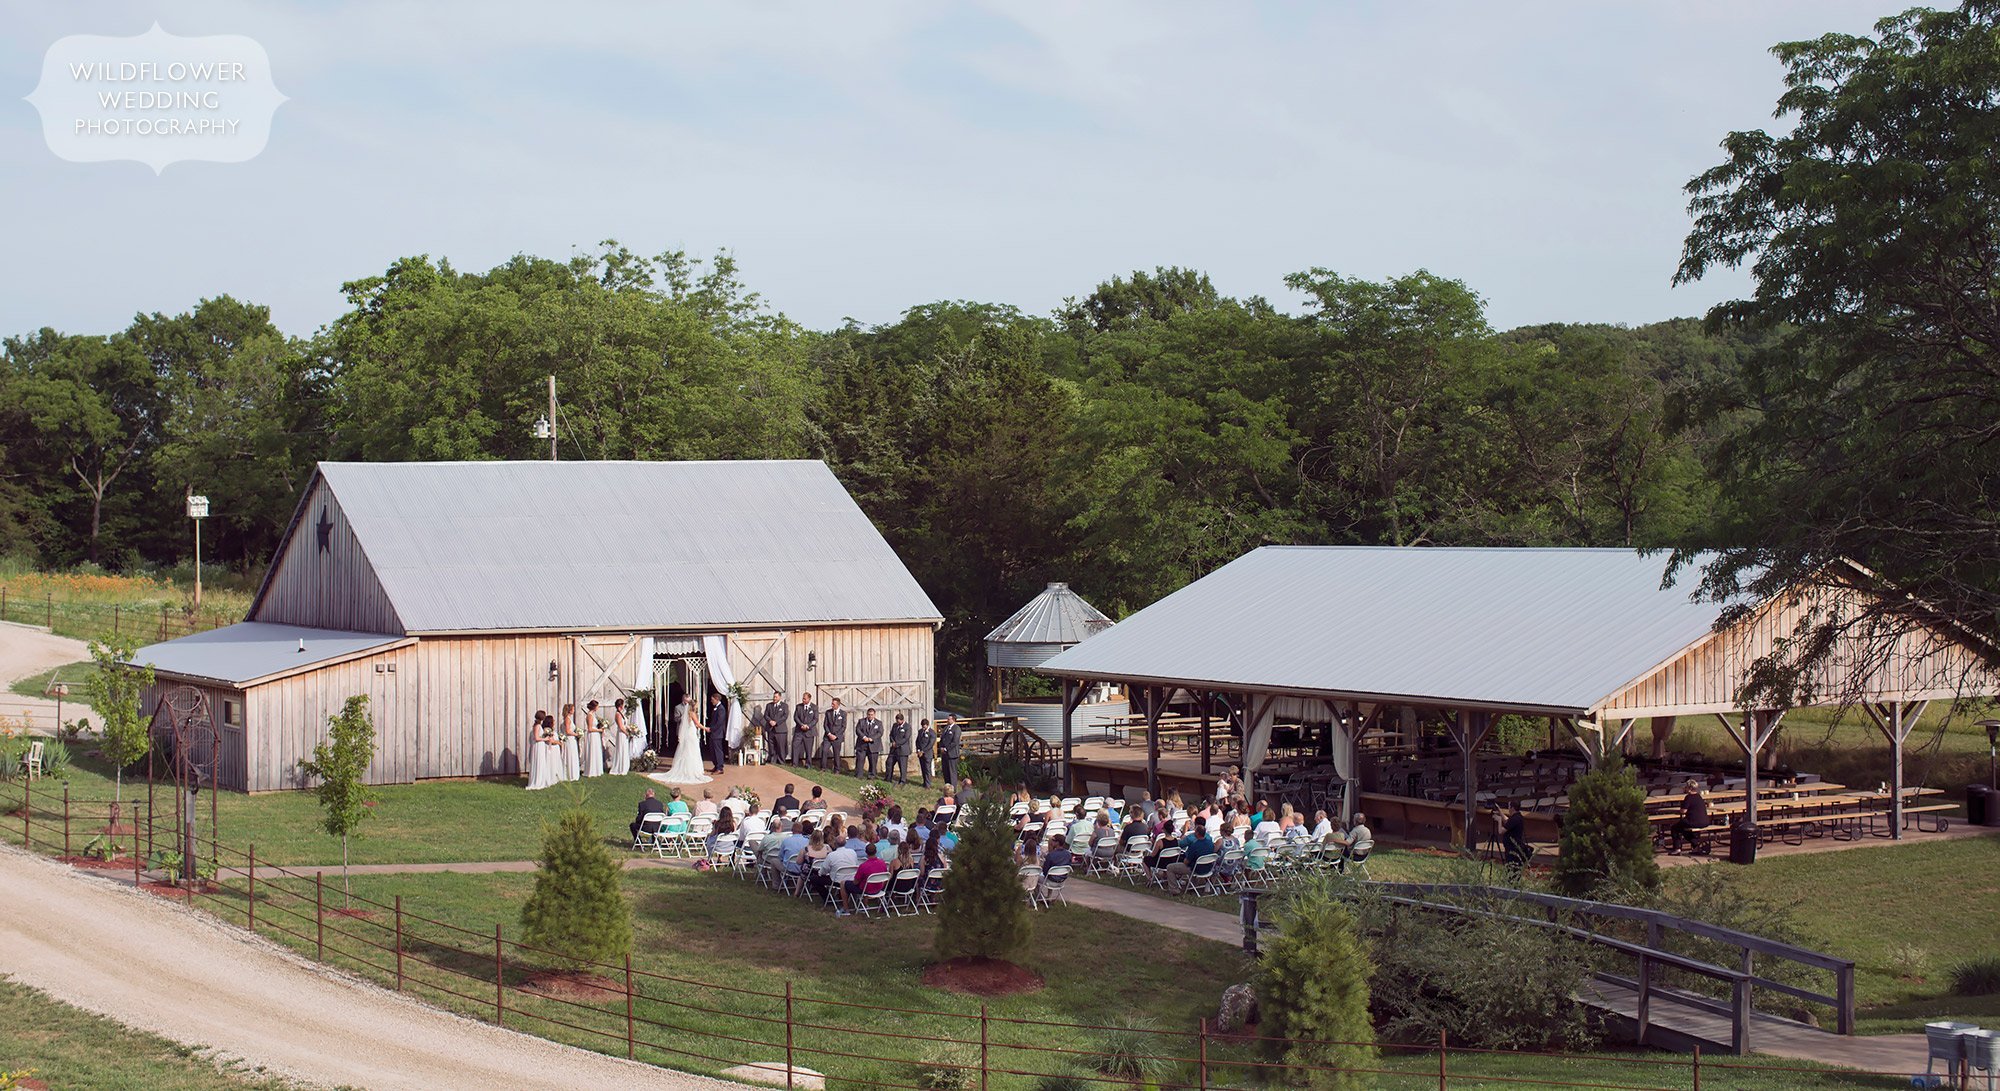 View of the outdoor ceremony in front of the reception barn at Kempker's Back 40, a rustic wedding venue in Westphalia.